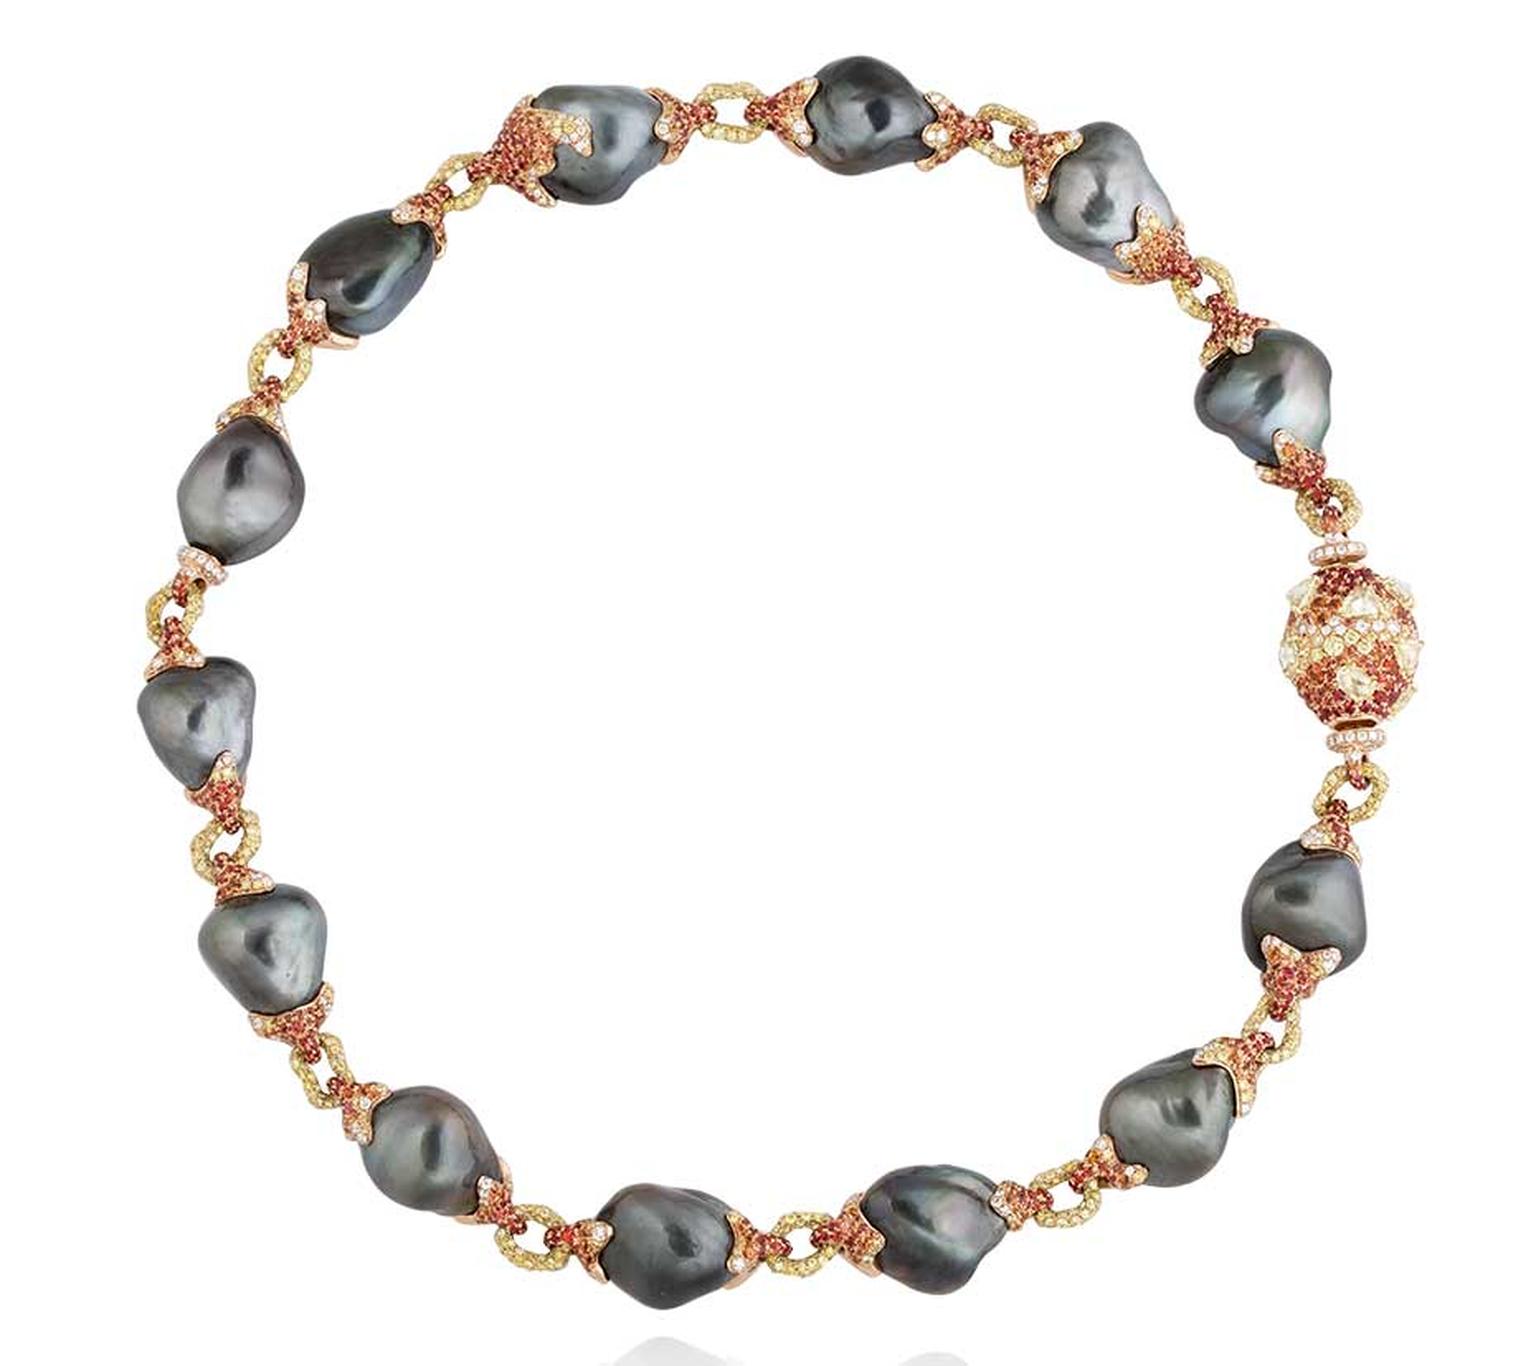 Alessio Boschi recreates the raging properties of an erupting volcano in this stunning statement necklace, in which hot lava is represented by fiery orange sapphires and yellow diamonds set in rose gold, and black and grey Tahitian pearls form the molten 